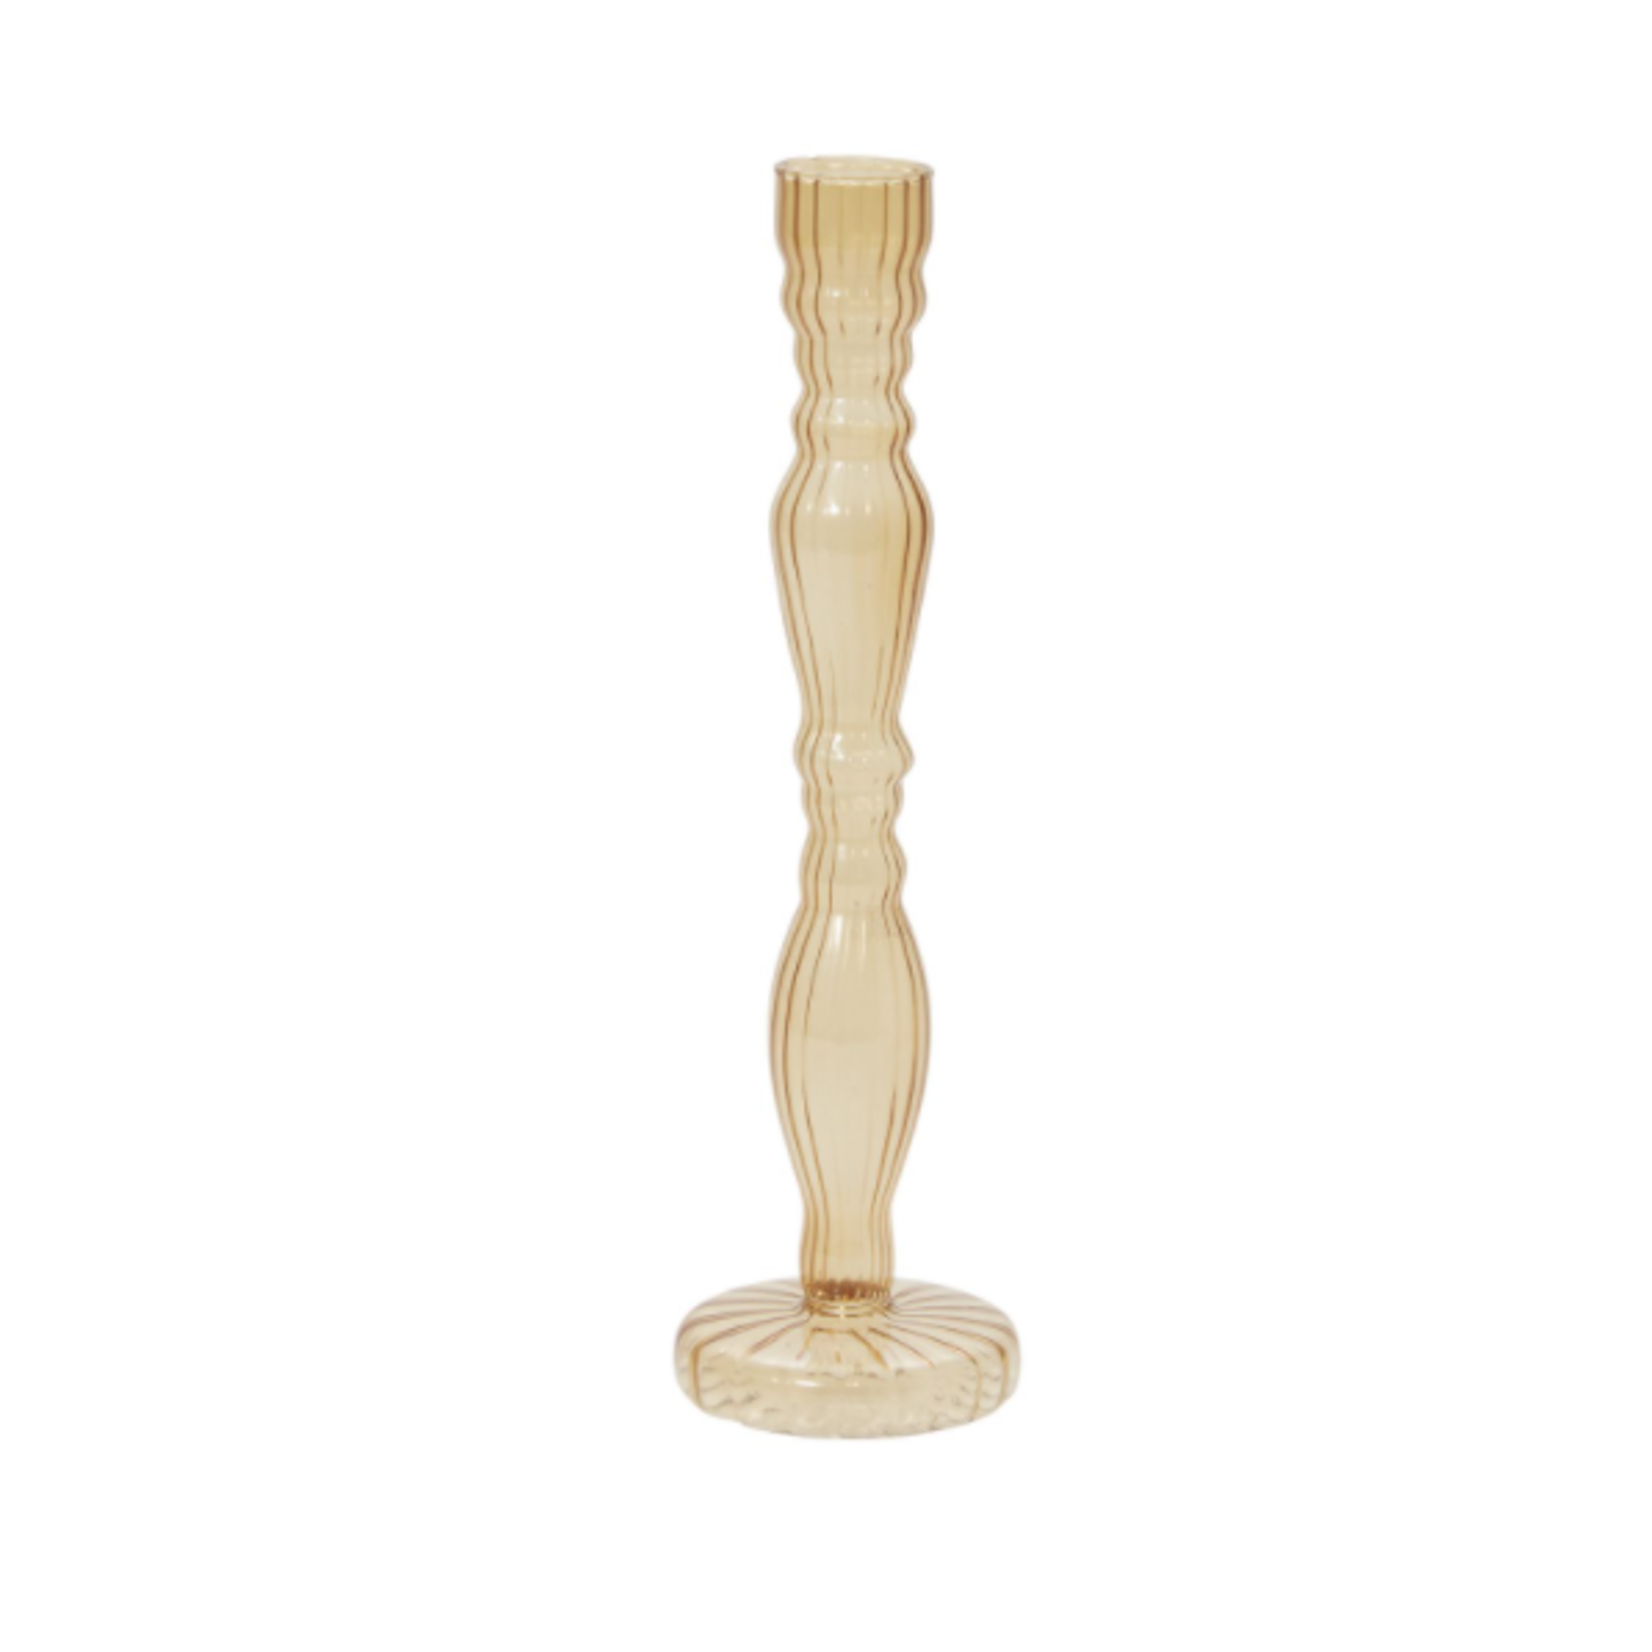 40% off was $10 now $6. 8.5”H X 2.5” YELLOW GLASS RAYWOOD BUDVASE AND/OR CANDLE HOLDER